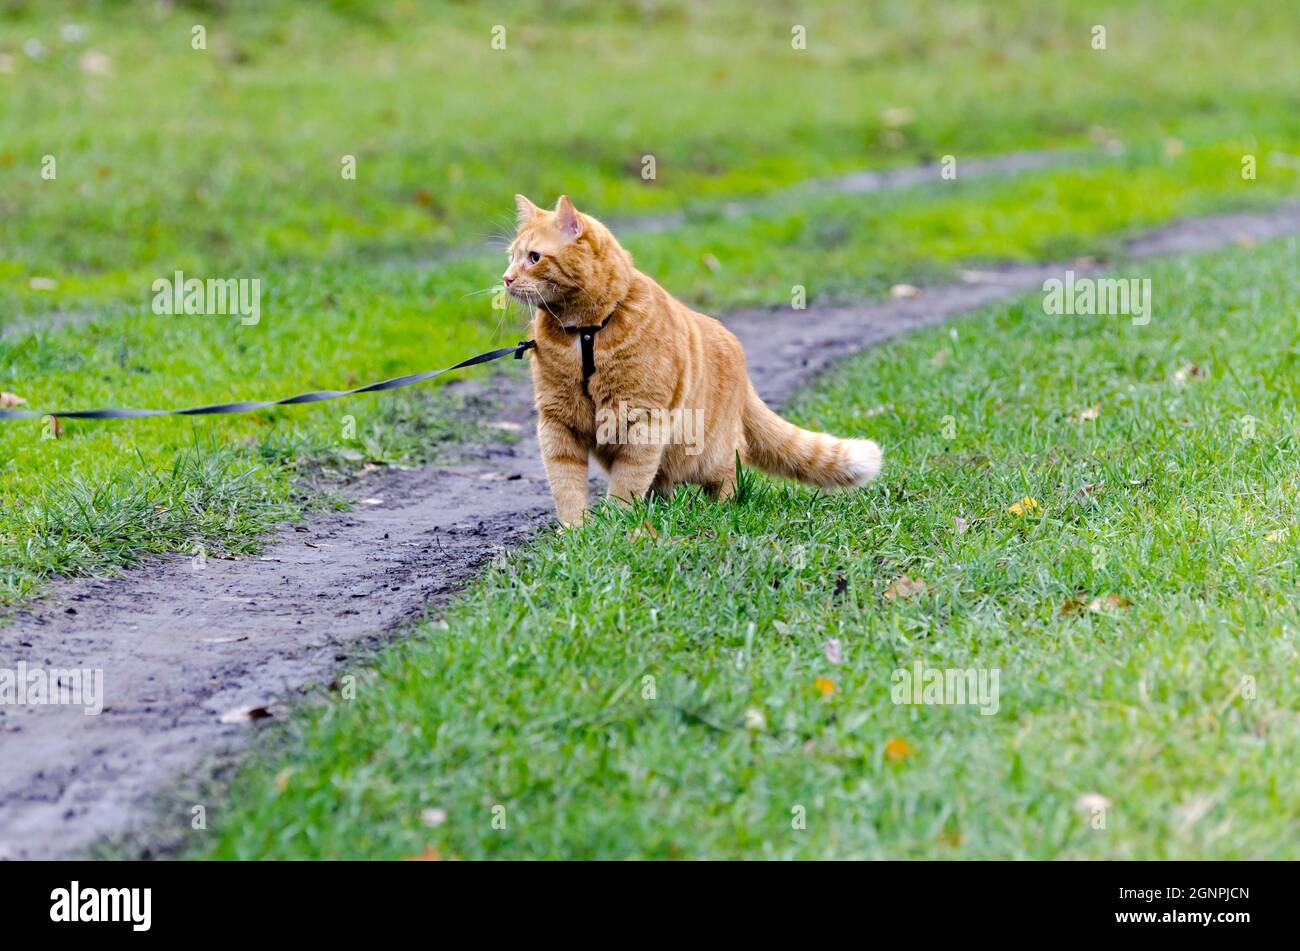 A red cat on a leash walks on the green grass. Stock Photo